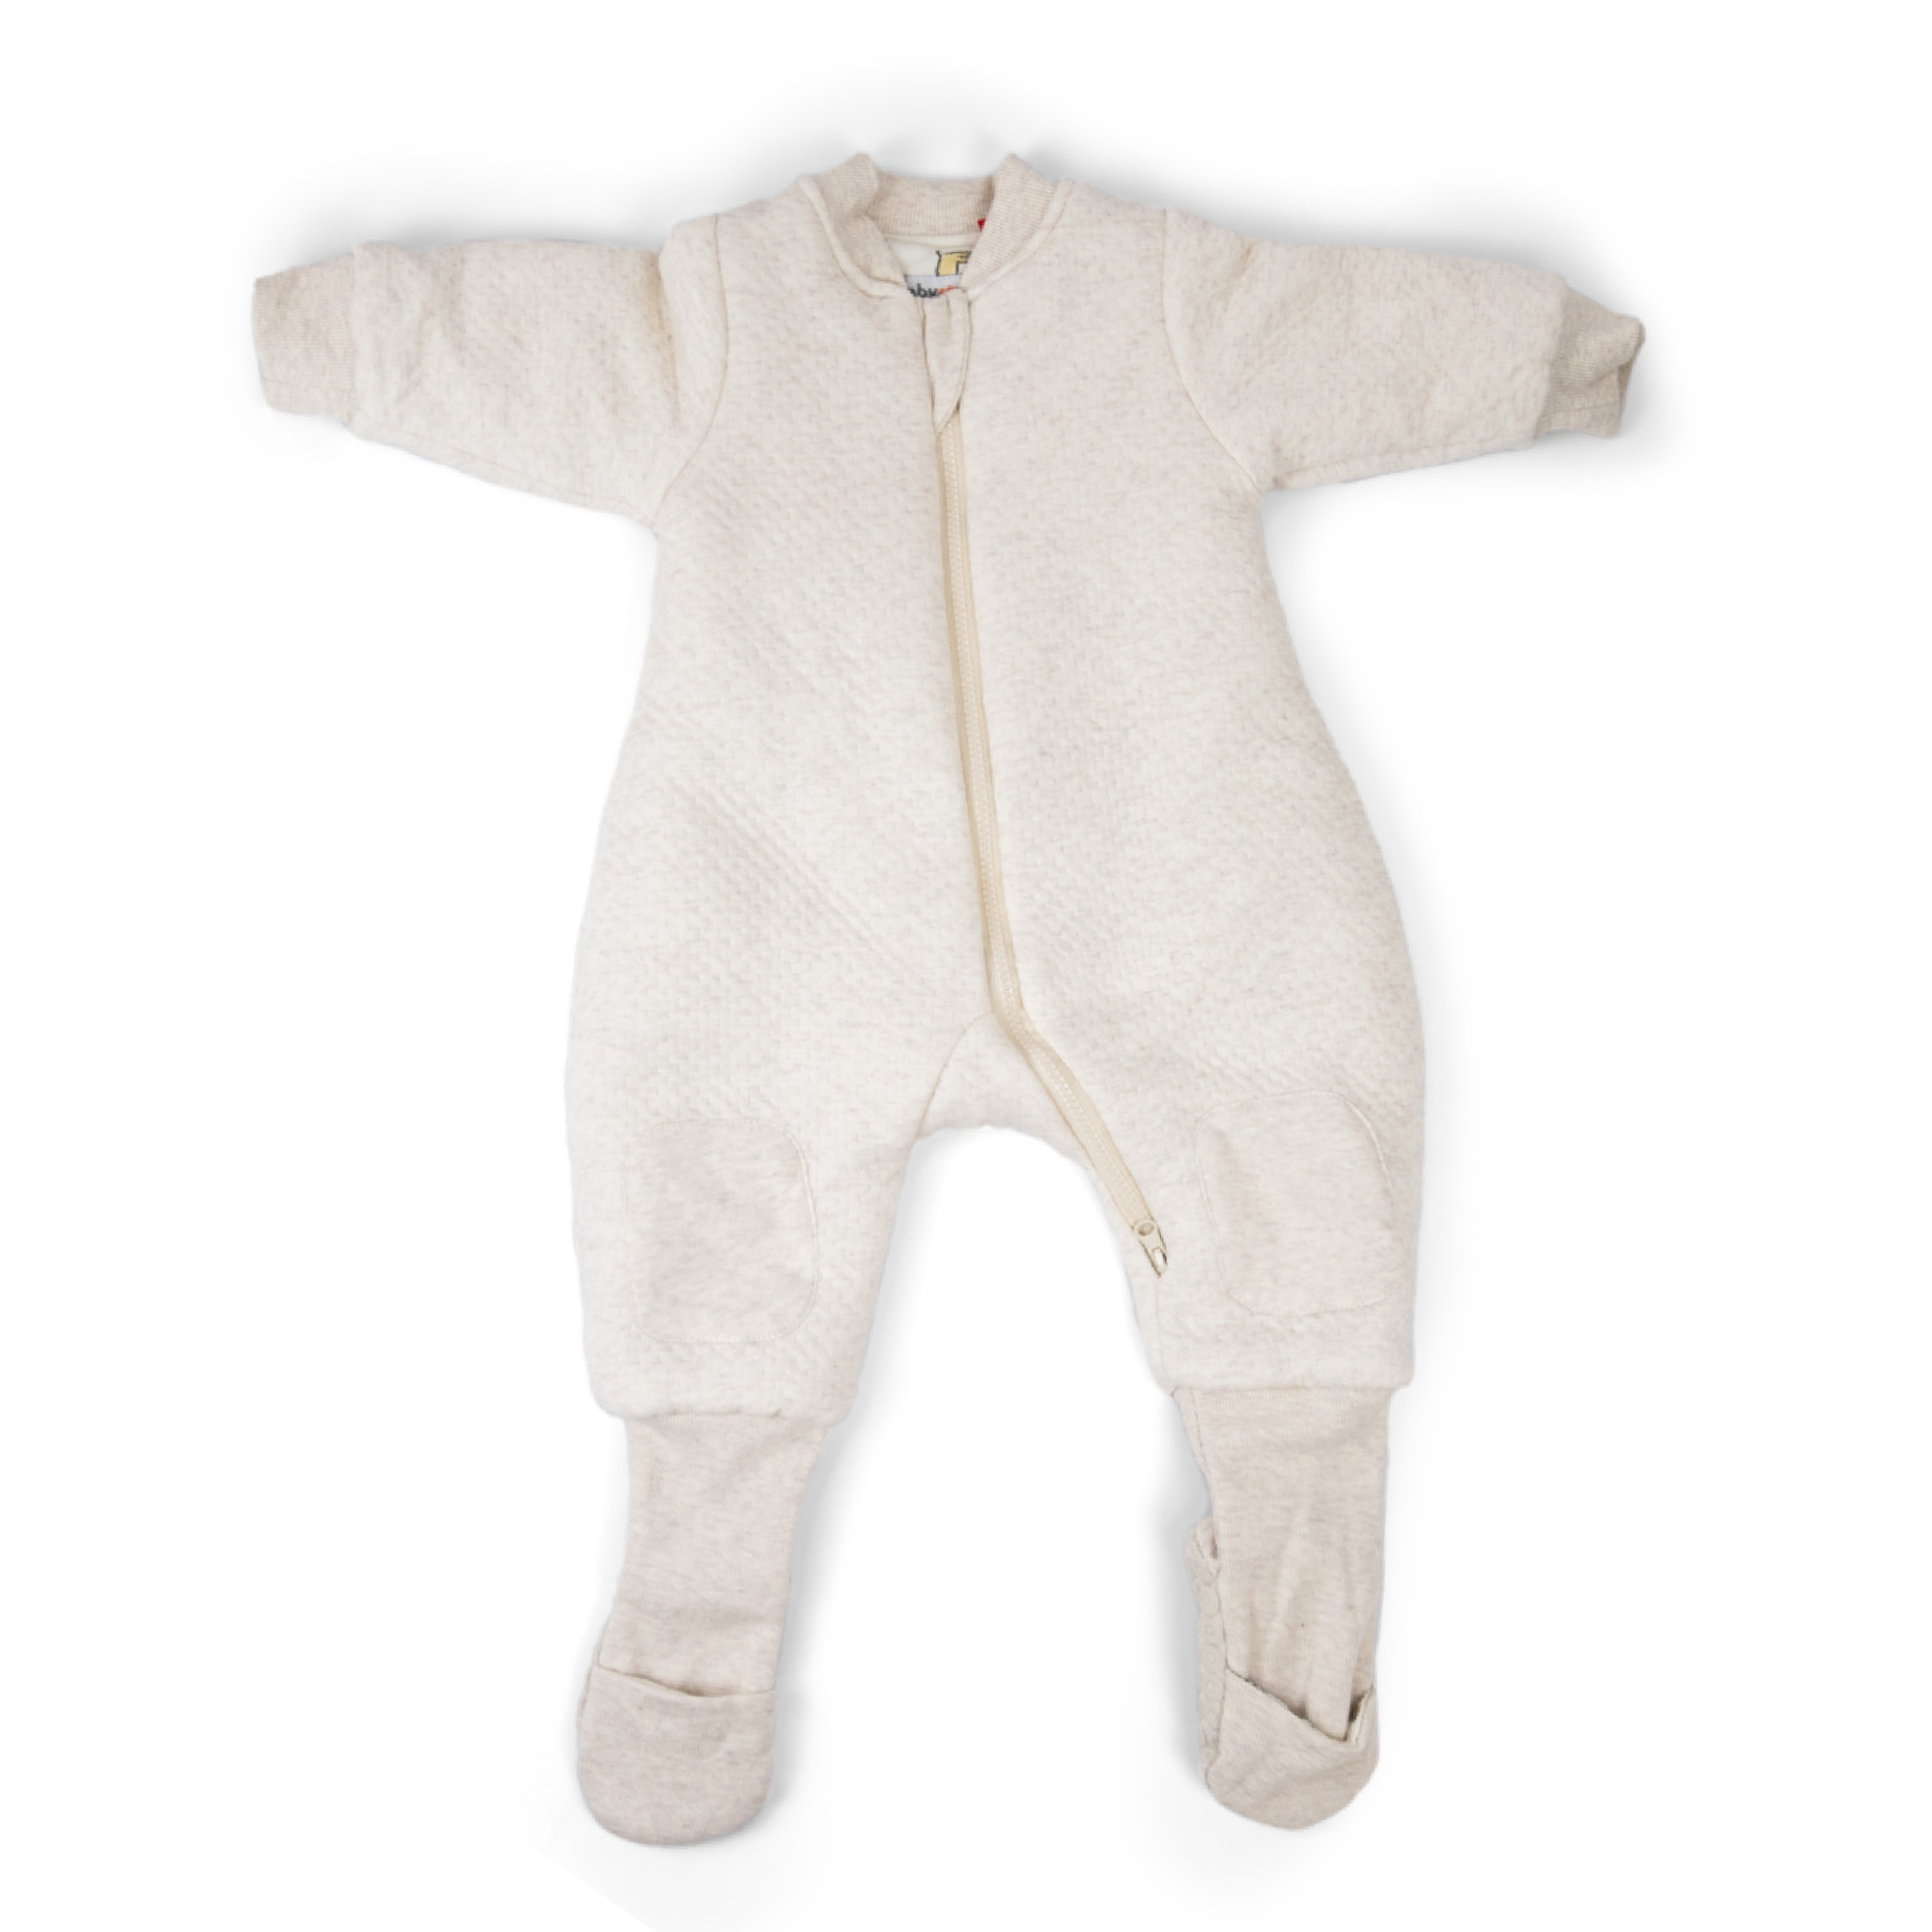 Oatmeal warmie with sleeves and legs - cotton 3.0 tog